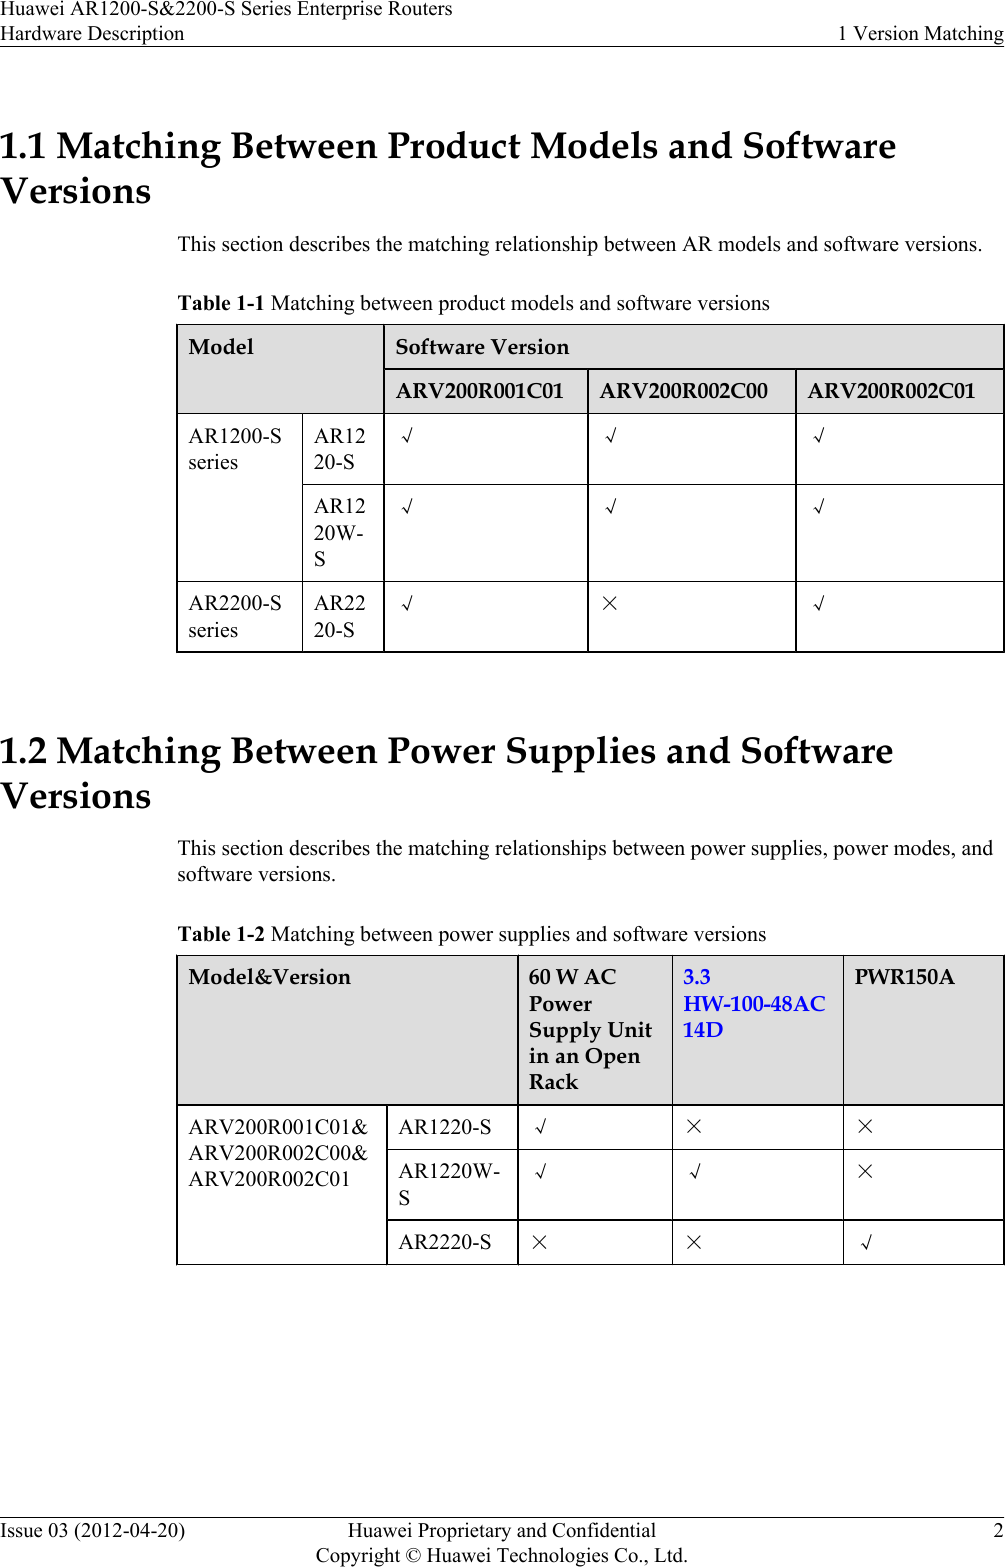 1.1 Matching Between Product Models and SoftwareVersionsThis section describes the matching relationship between AR models and software versions.Table 1-1 Matching between product models and software versionsModel Software VersionARV200R001C01 ARV200R002C00 ARV200R002C01AR1200-SseriesAR1220-S√ √ √AR1220W-S√ √ √AR2200-SseriesAR2220-S√ × √ 1.2 Matching Between Power Supplies and SoftwareVersionsThis section describes the matching relationships between power supplies, power modes, andsoftware versions.Table 1-2 Matching between power supplies and software versionsModel&amp;Version 60 W ACPowerSupply Unitin an OpenRack3.3HW-100-48AC14DPWR150AARV200R001C01&amp;ARV200R002C00&amp;ARV200R002C01AR1220-S √ × ×AR1220W-S√ √ ×AR2220-S × × √ Huawei AR1200-S&amp;2200-S Series Enterprise RoutersHardware Description 1 Version MatchingIssue 03 (2012-04-20) Huawei Proprietary and ConfidentialCopyright © Huawei Technologies Co., Ltd.2